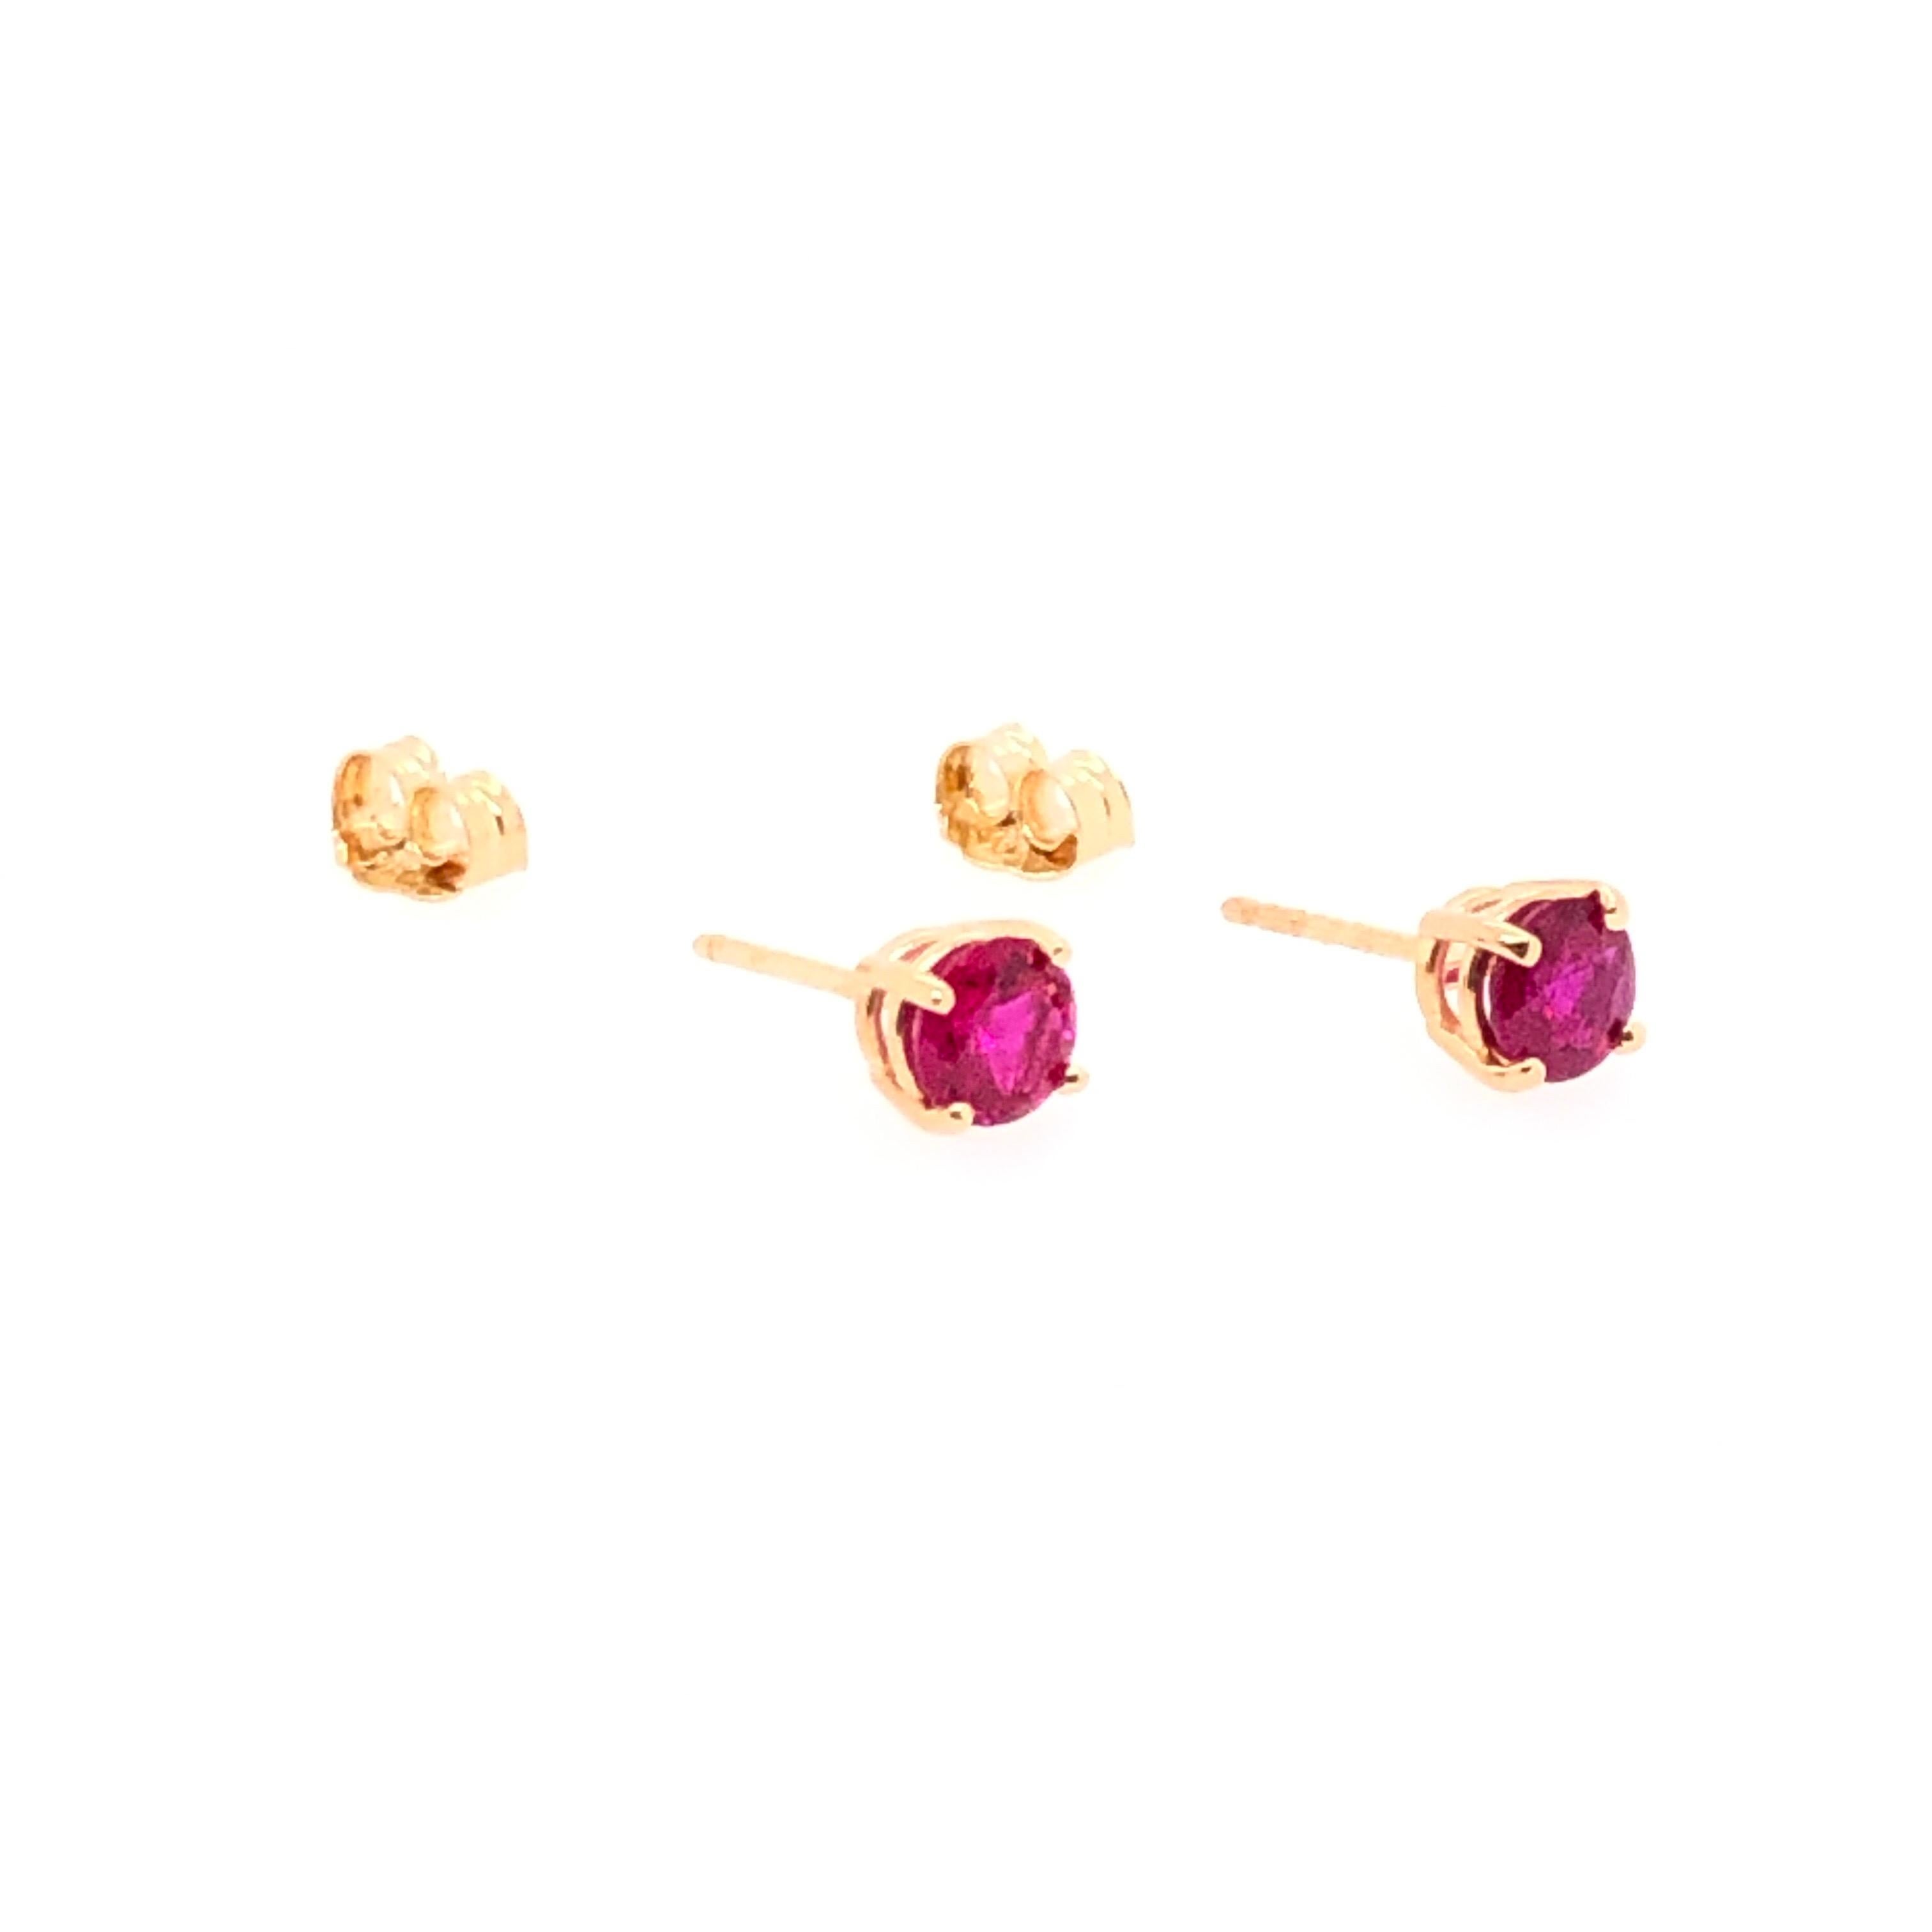 A touch of color in a timeless setting, these beautiful bright rubies illuminate the shadows. Rubies are thought to balance the heart, invigorate the body, encourage joy and laughter, and inspire courage. The classic design is steadfast enhancing